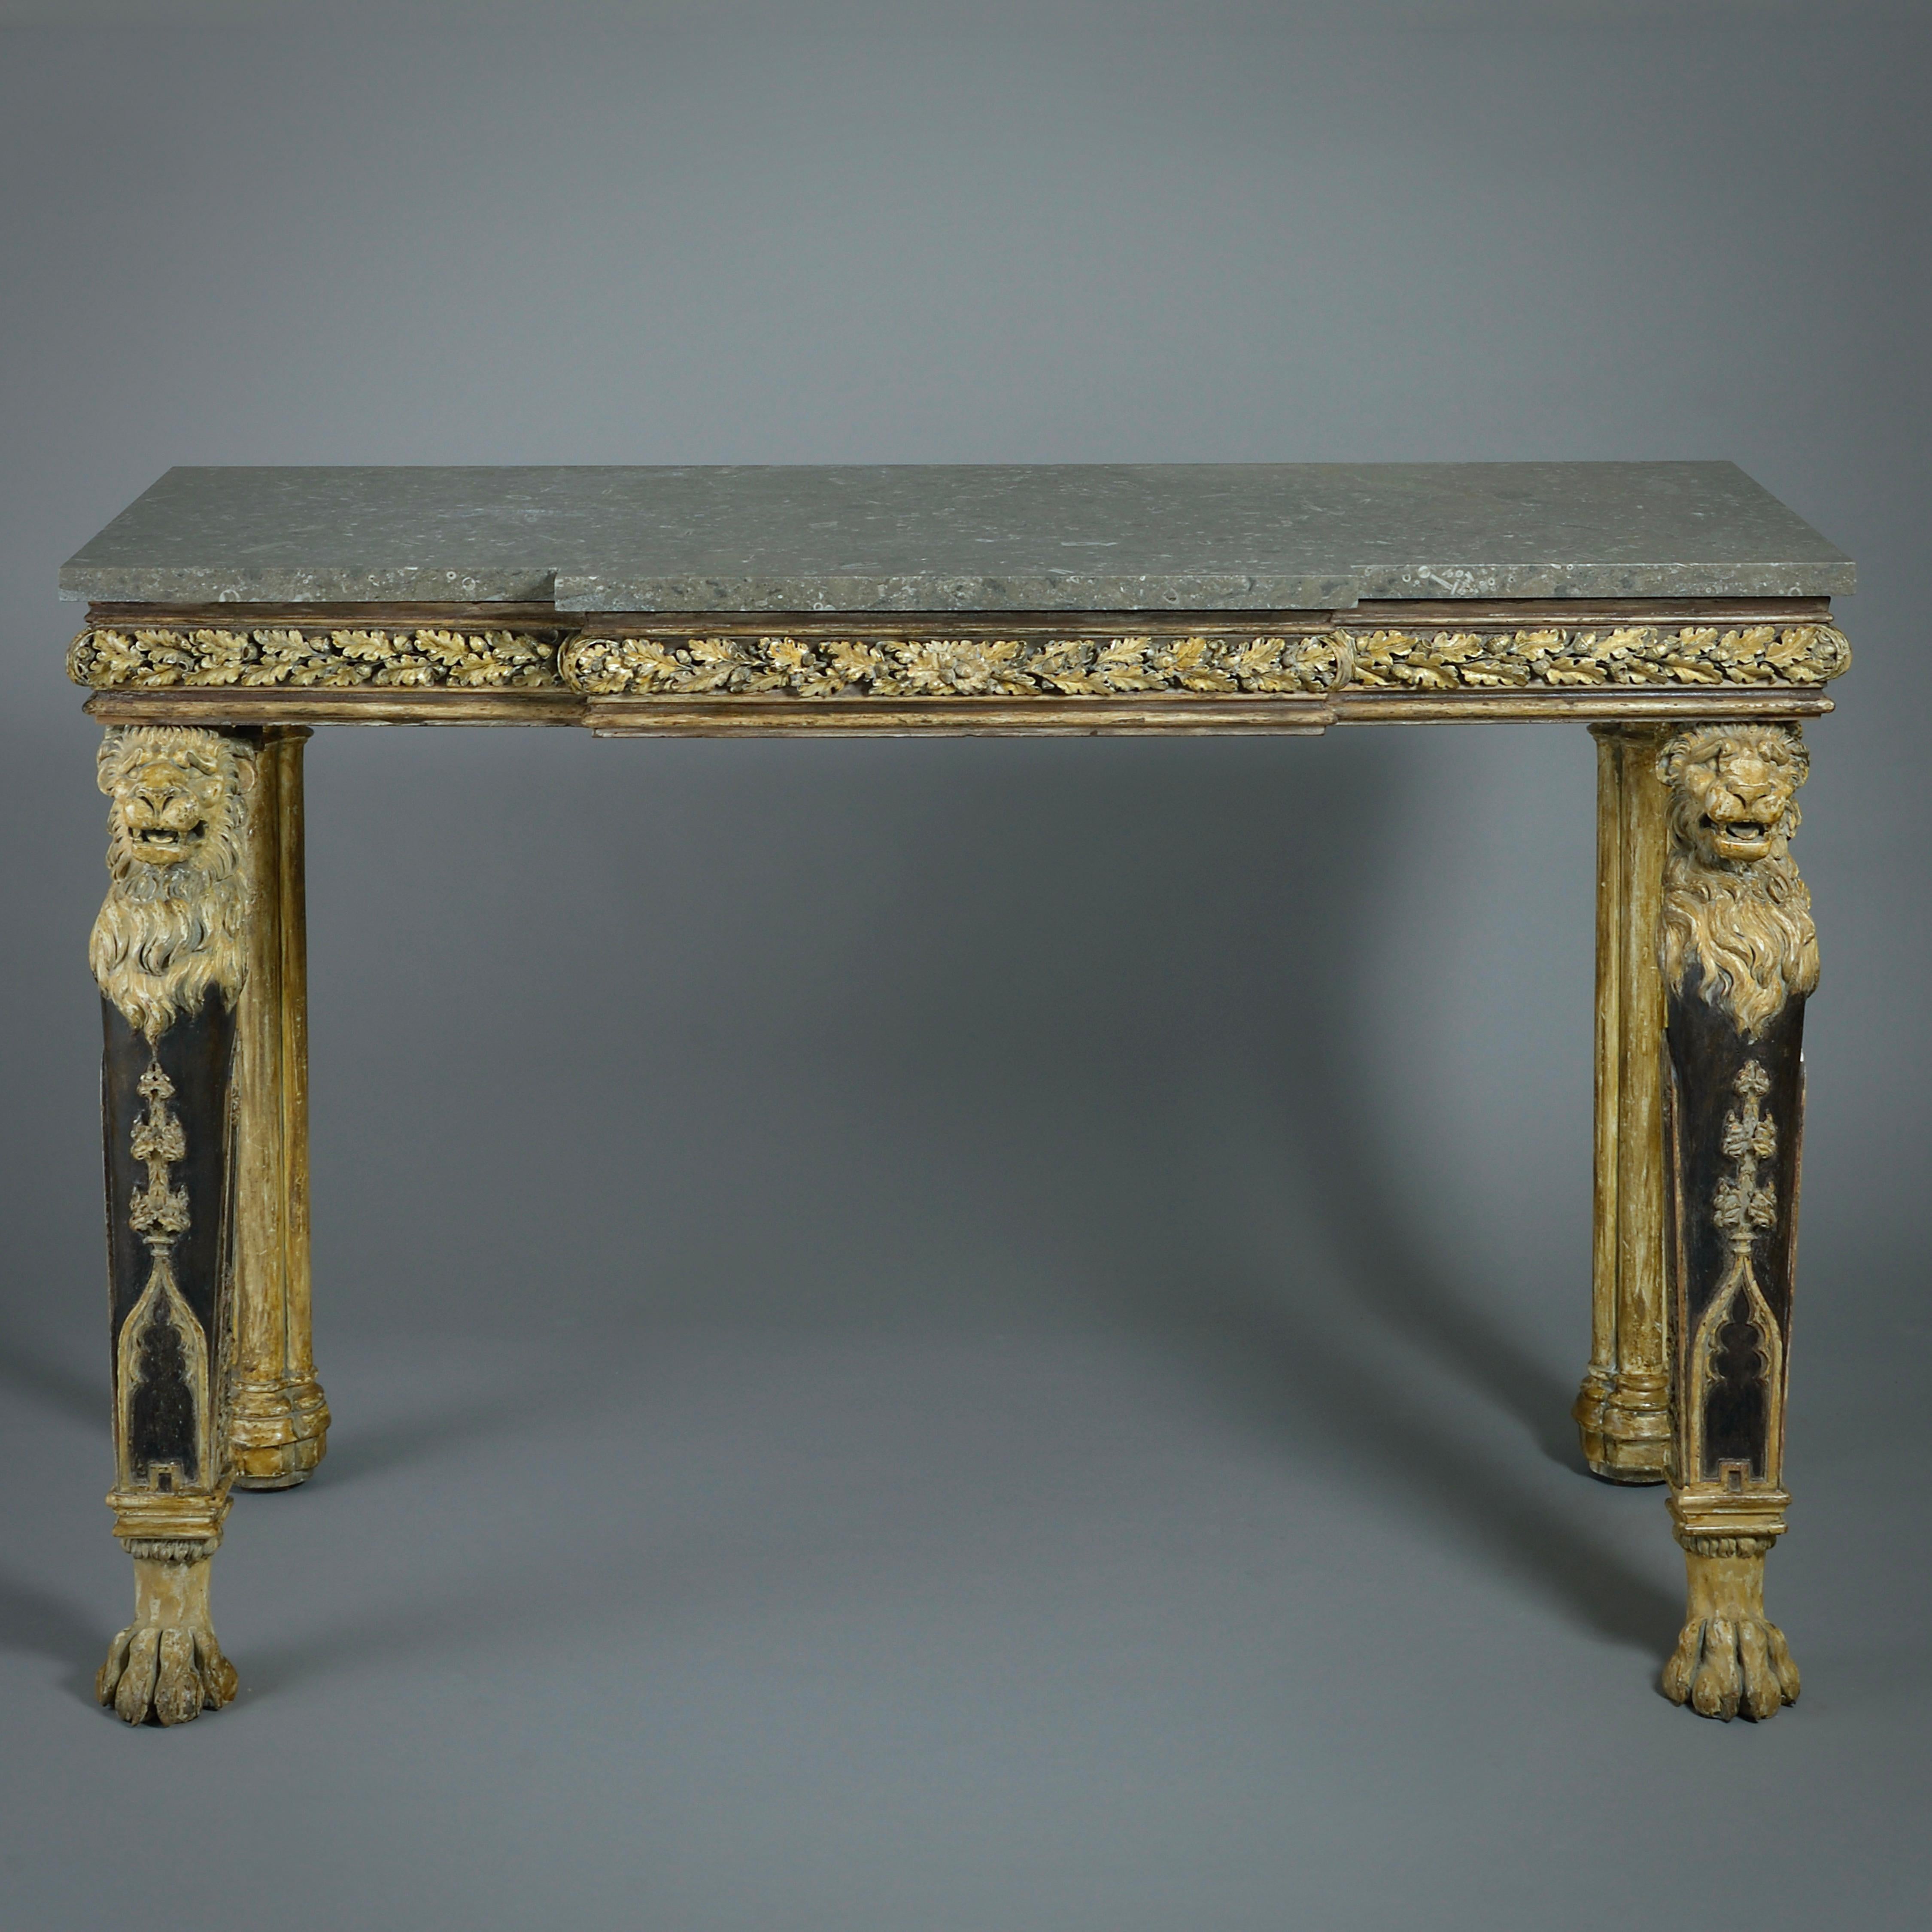 A MASSIVE PAIR OF IRISH GEORGE IV BRONZED AND PAINTED SIDE TABLES ATTRIBUTED TO JAMES DEL VECCHIO OF DUBLIN, CIRCA 1825.

Each with a later Derbyshire fossil marble top.